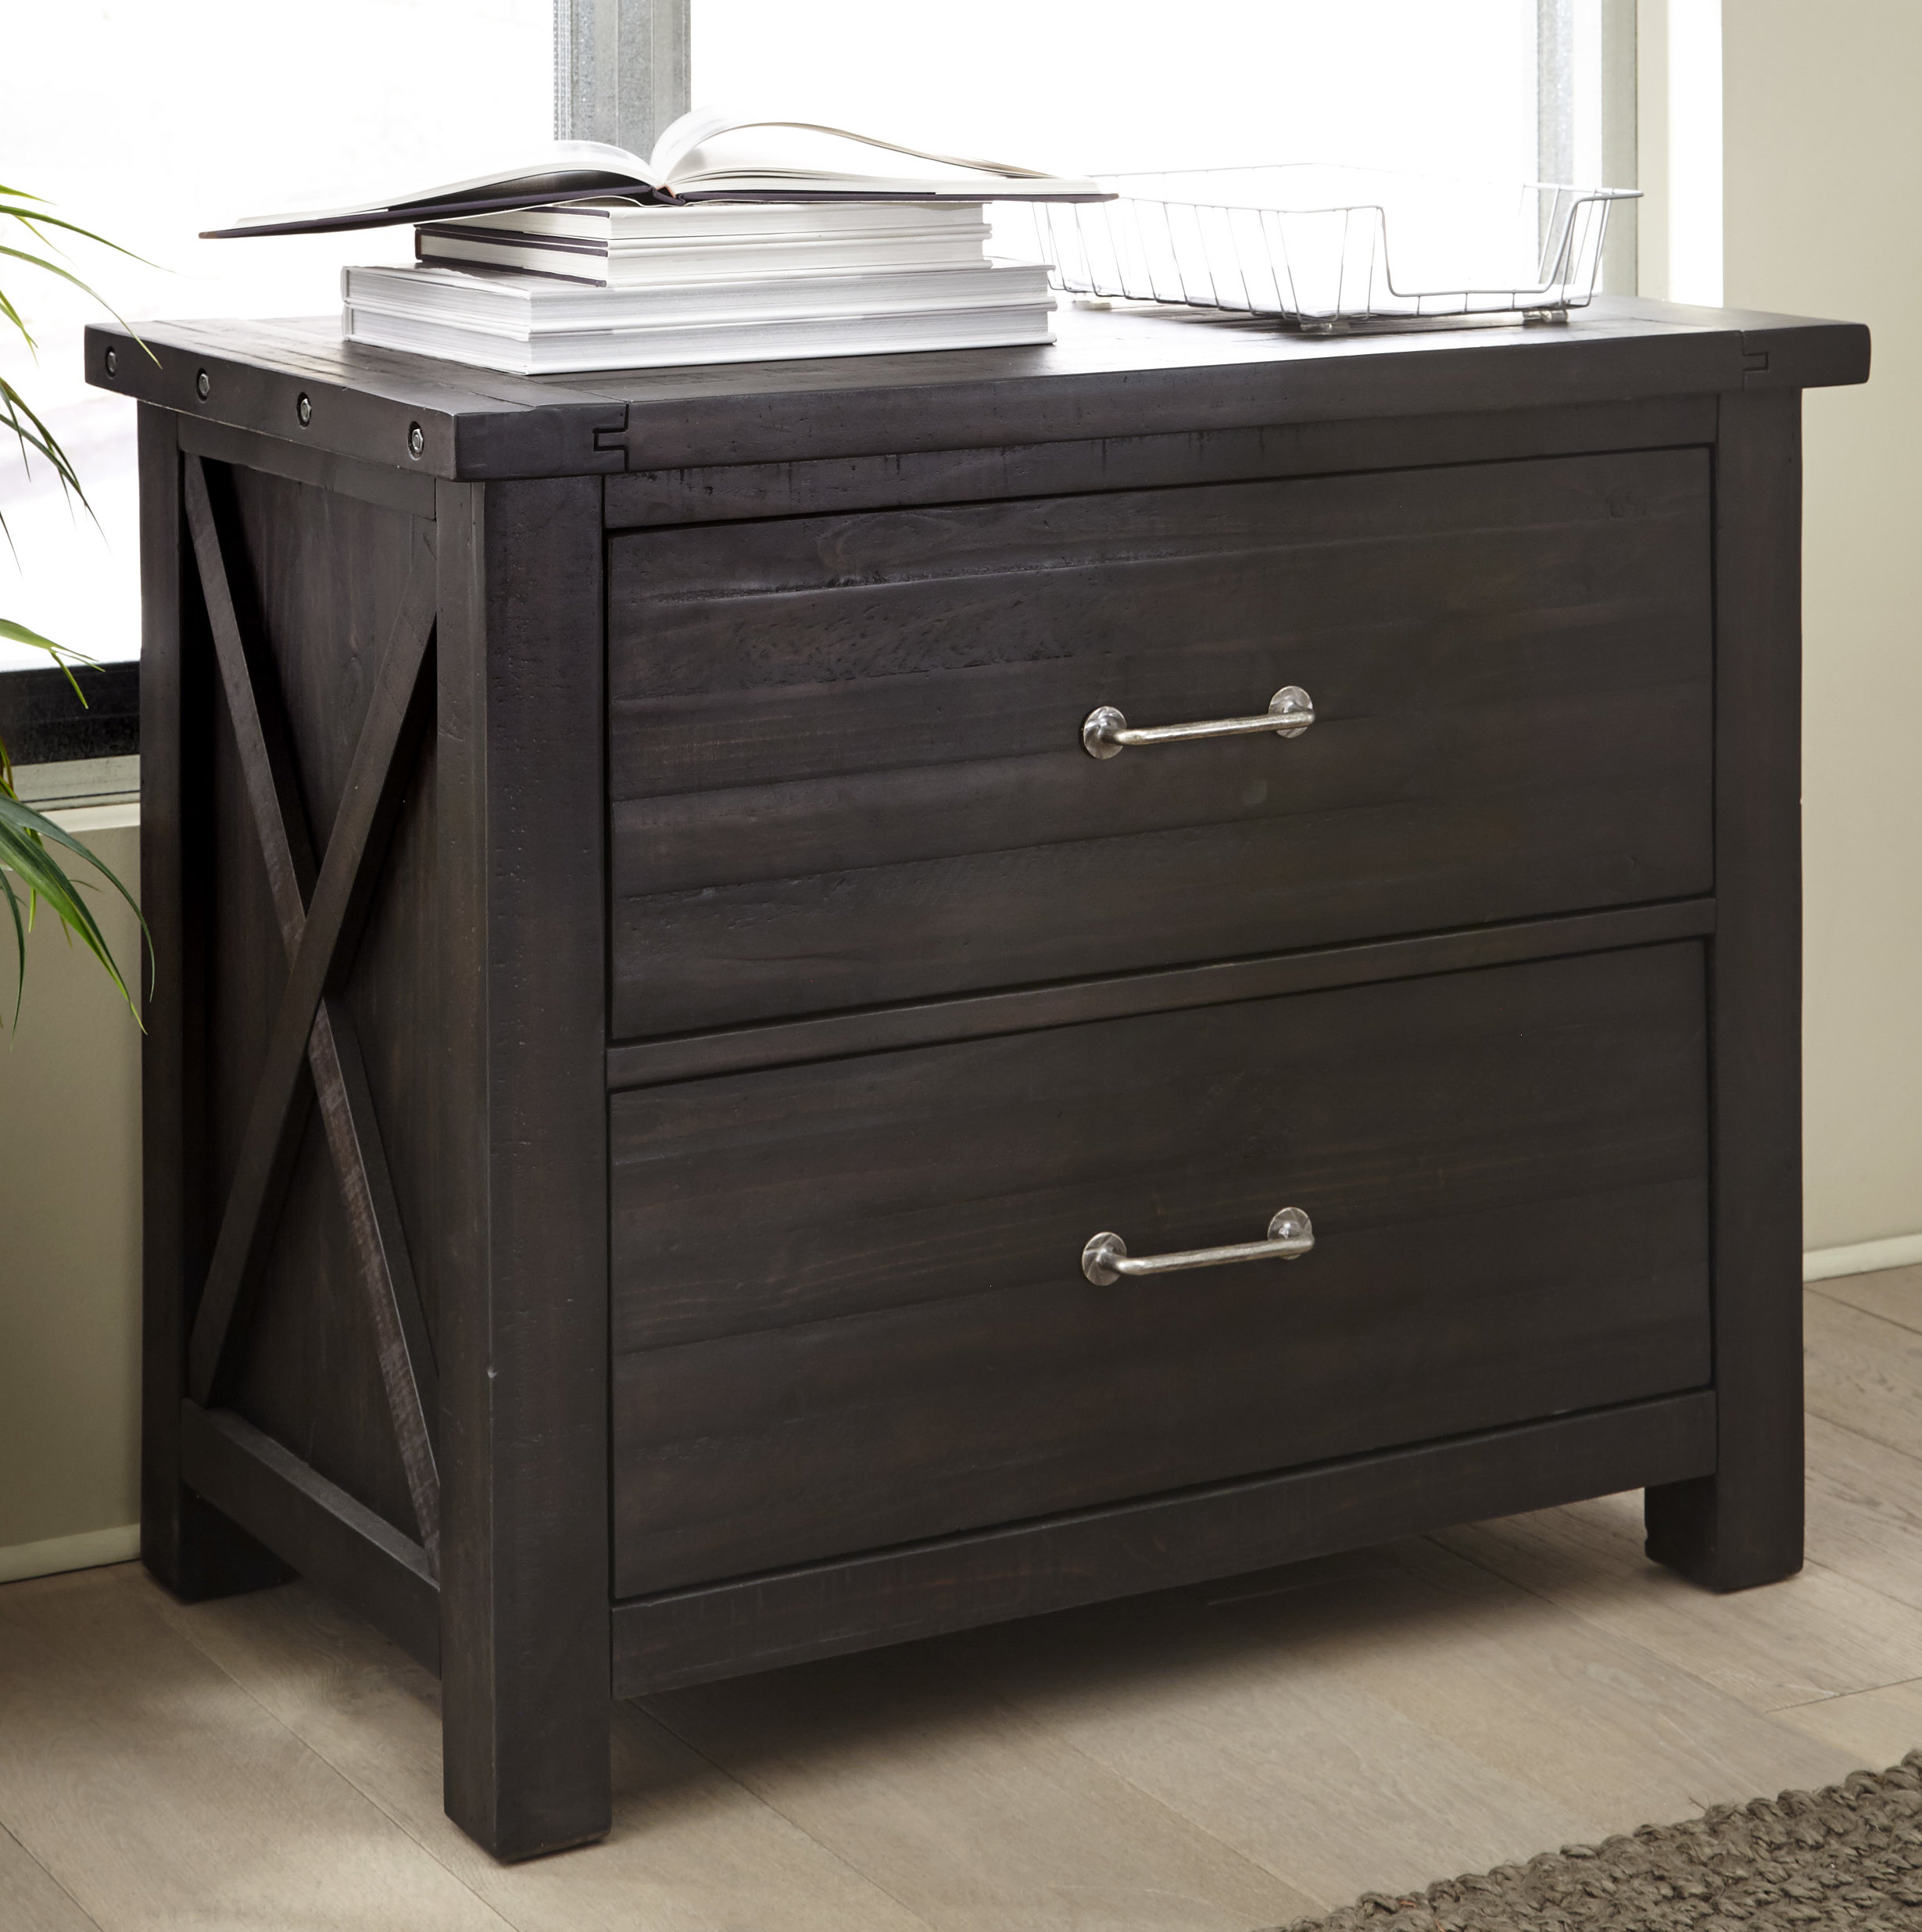 Laurel Foundry Modern Farmhouse Langsa Solid Wood 2 Drawer Lateral pertaining to size 2459 X 2472